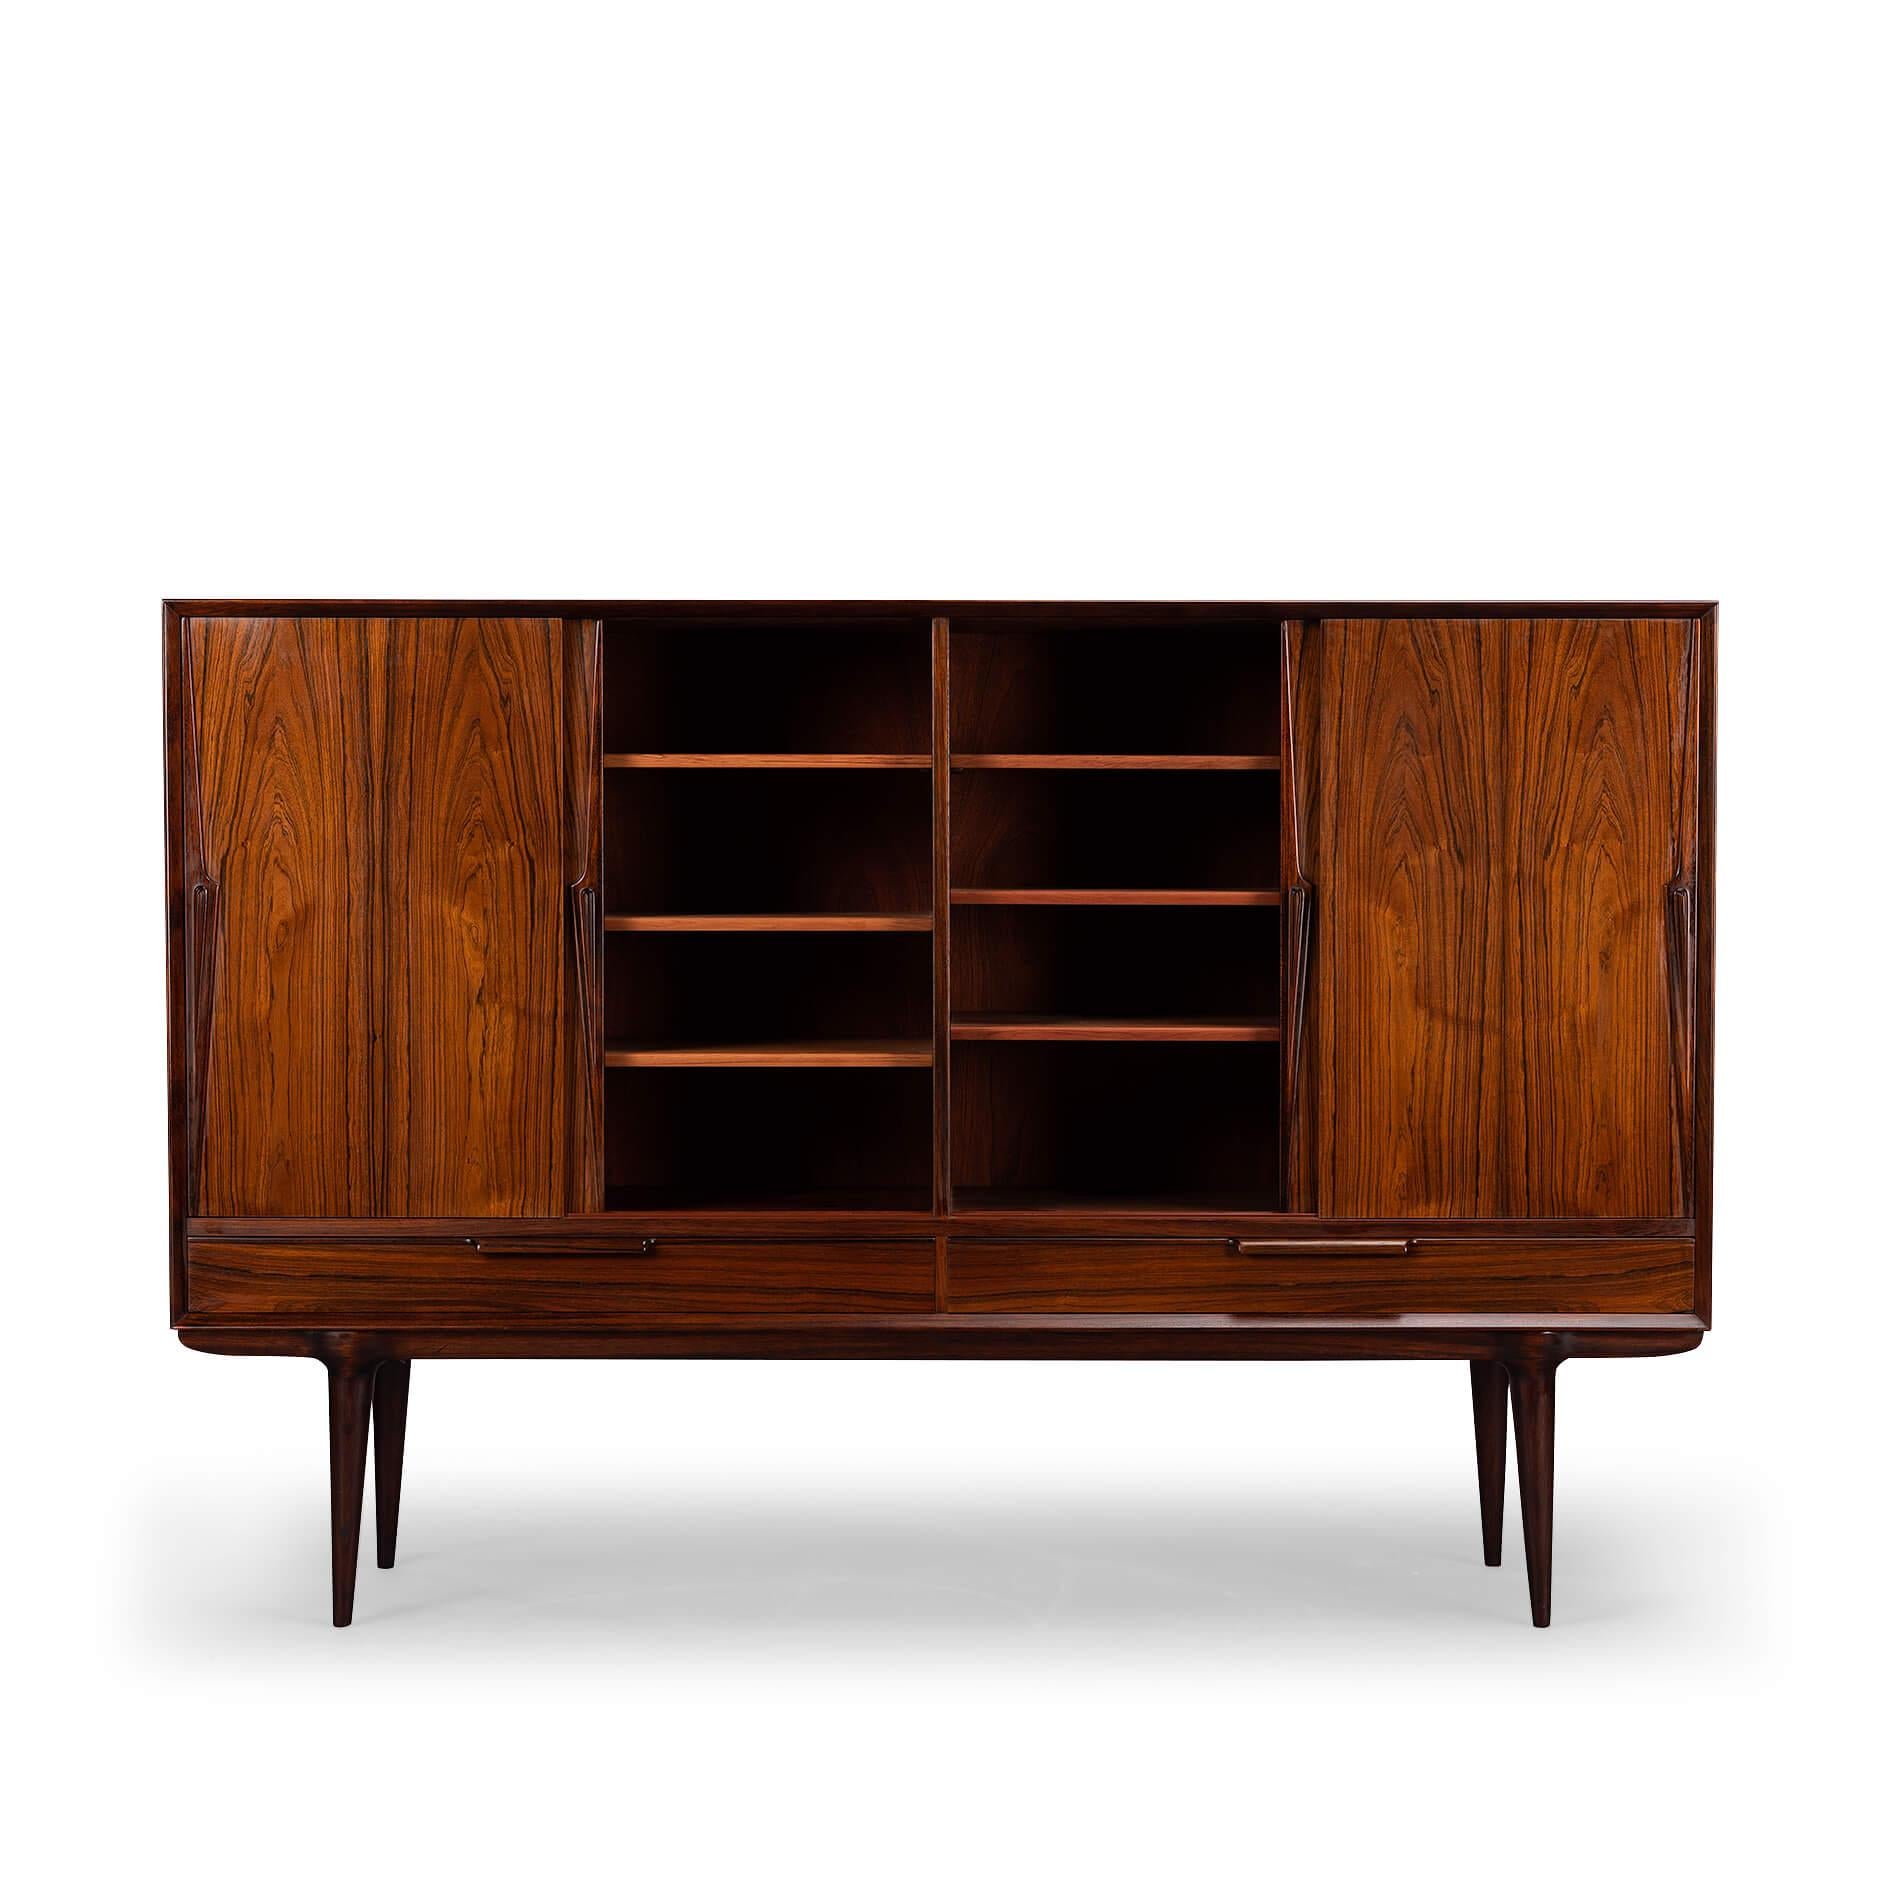 A classic among credenza's, this rosewood model #13 credenza designed by Gunni Omann for Omann Jun Møbelfabrik. Recognisable design features and perfectly proportioned, with a low profile design, this piece will work well with any modern